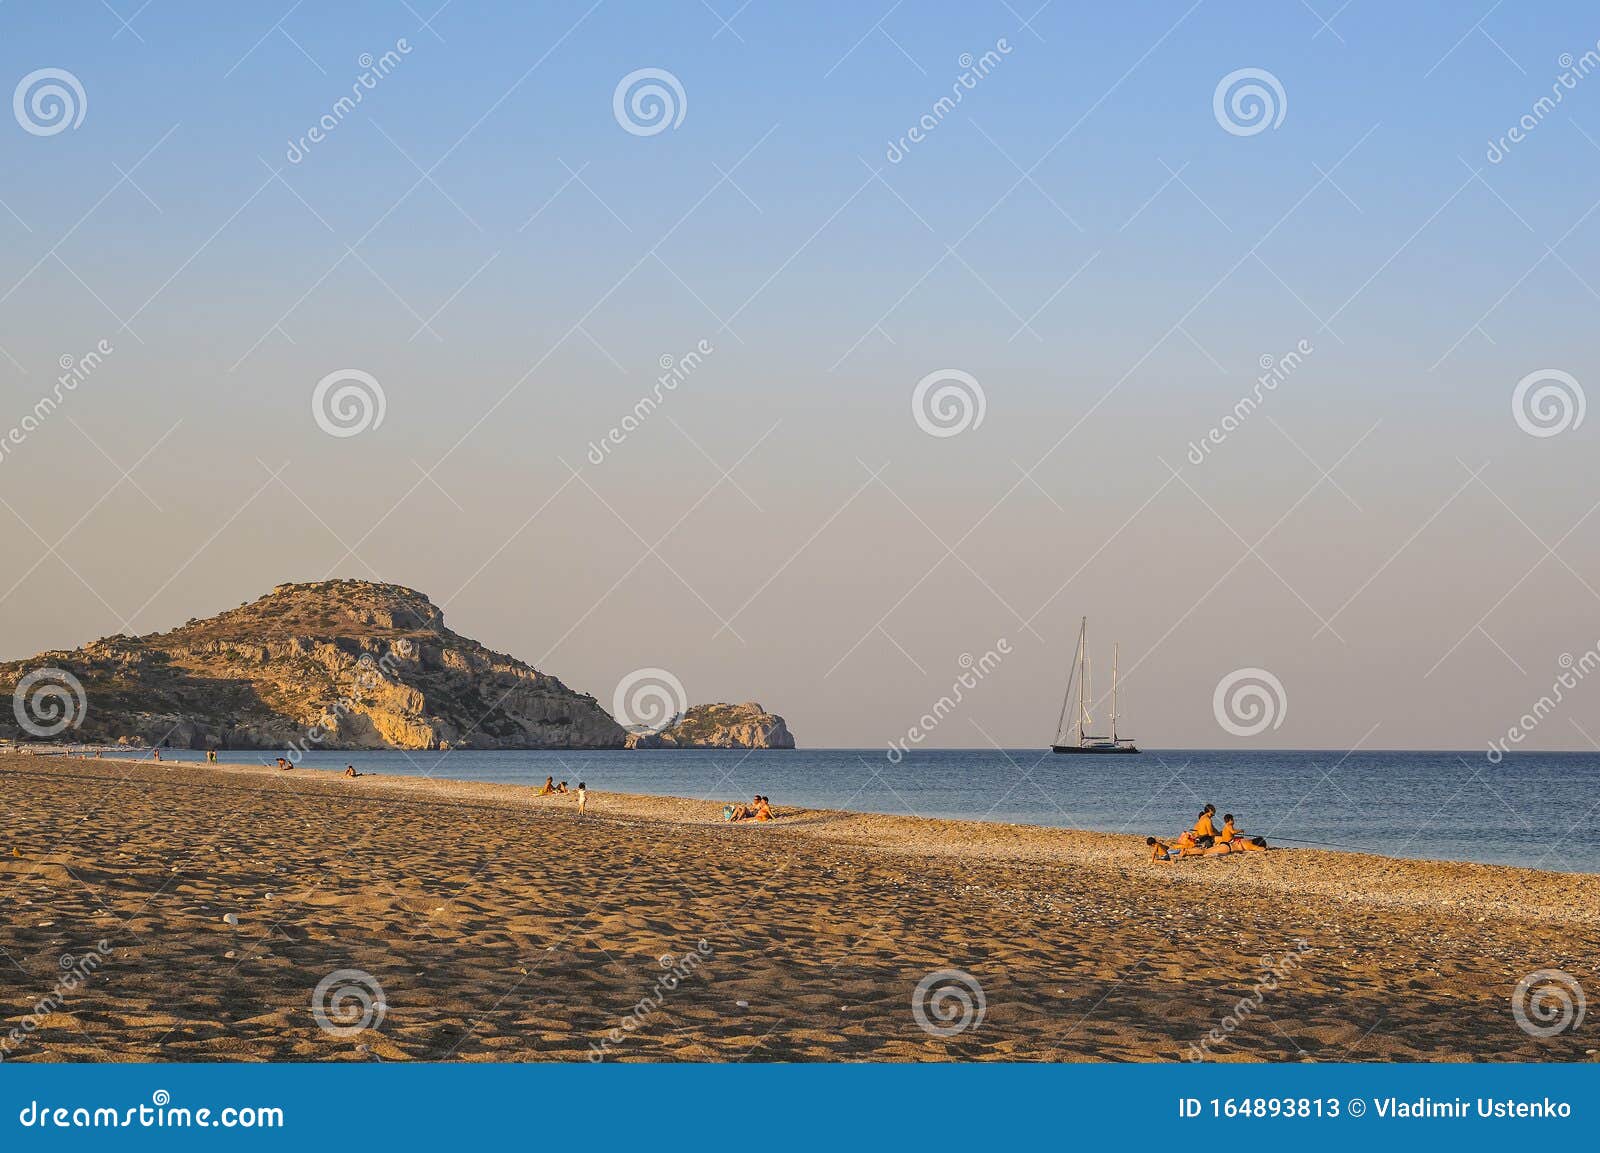 A Quiet Evening and People Relaxing on the Shores of the Mediterranean